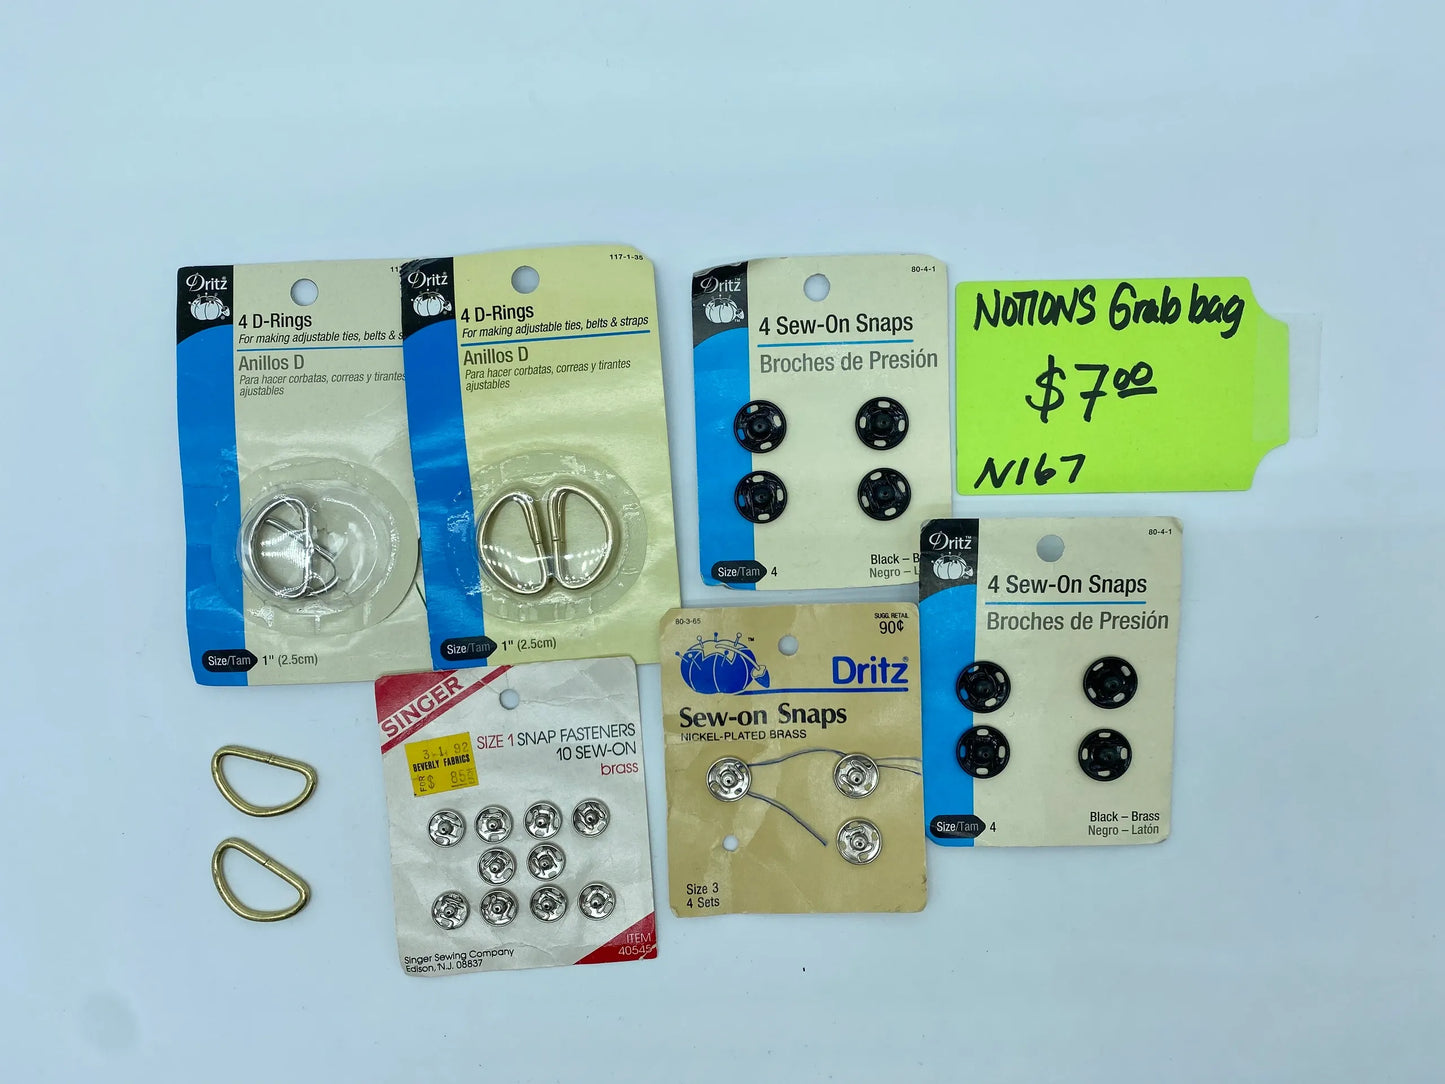 Grab Bag Sewing Notions, D-Rings, Snaps, Sewing Supplies, Clothes Making Supplies